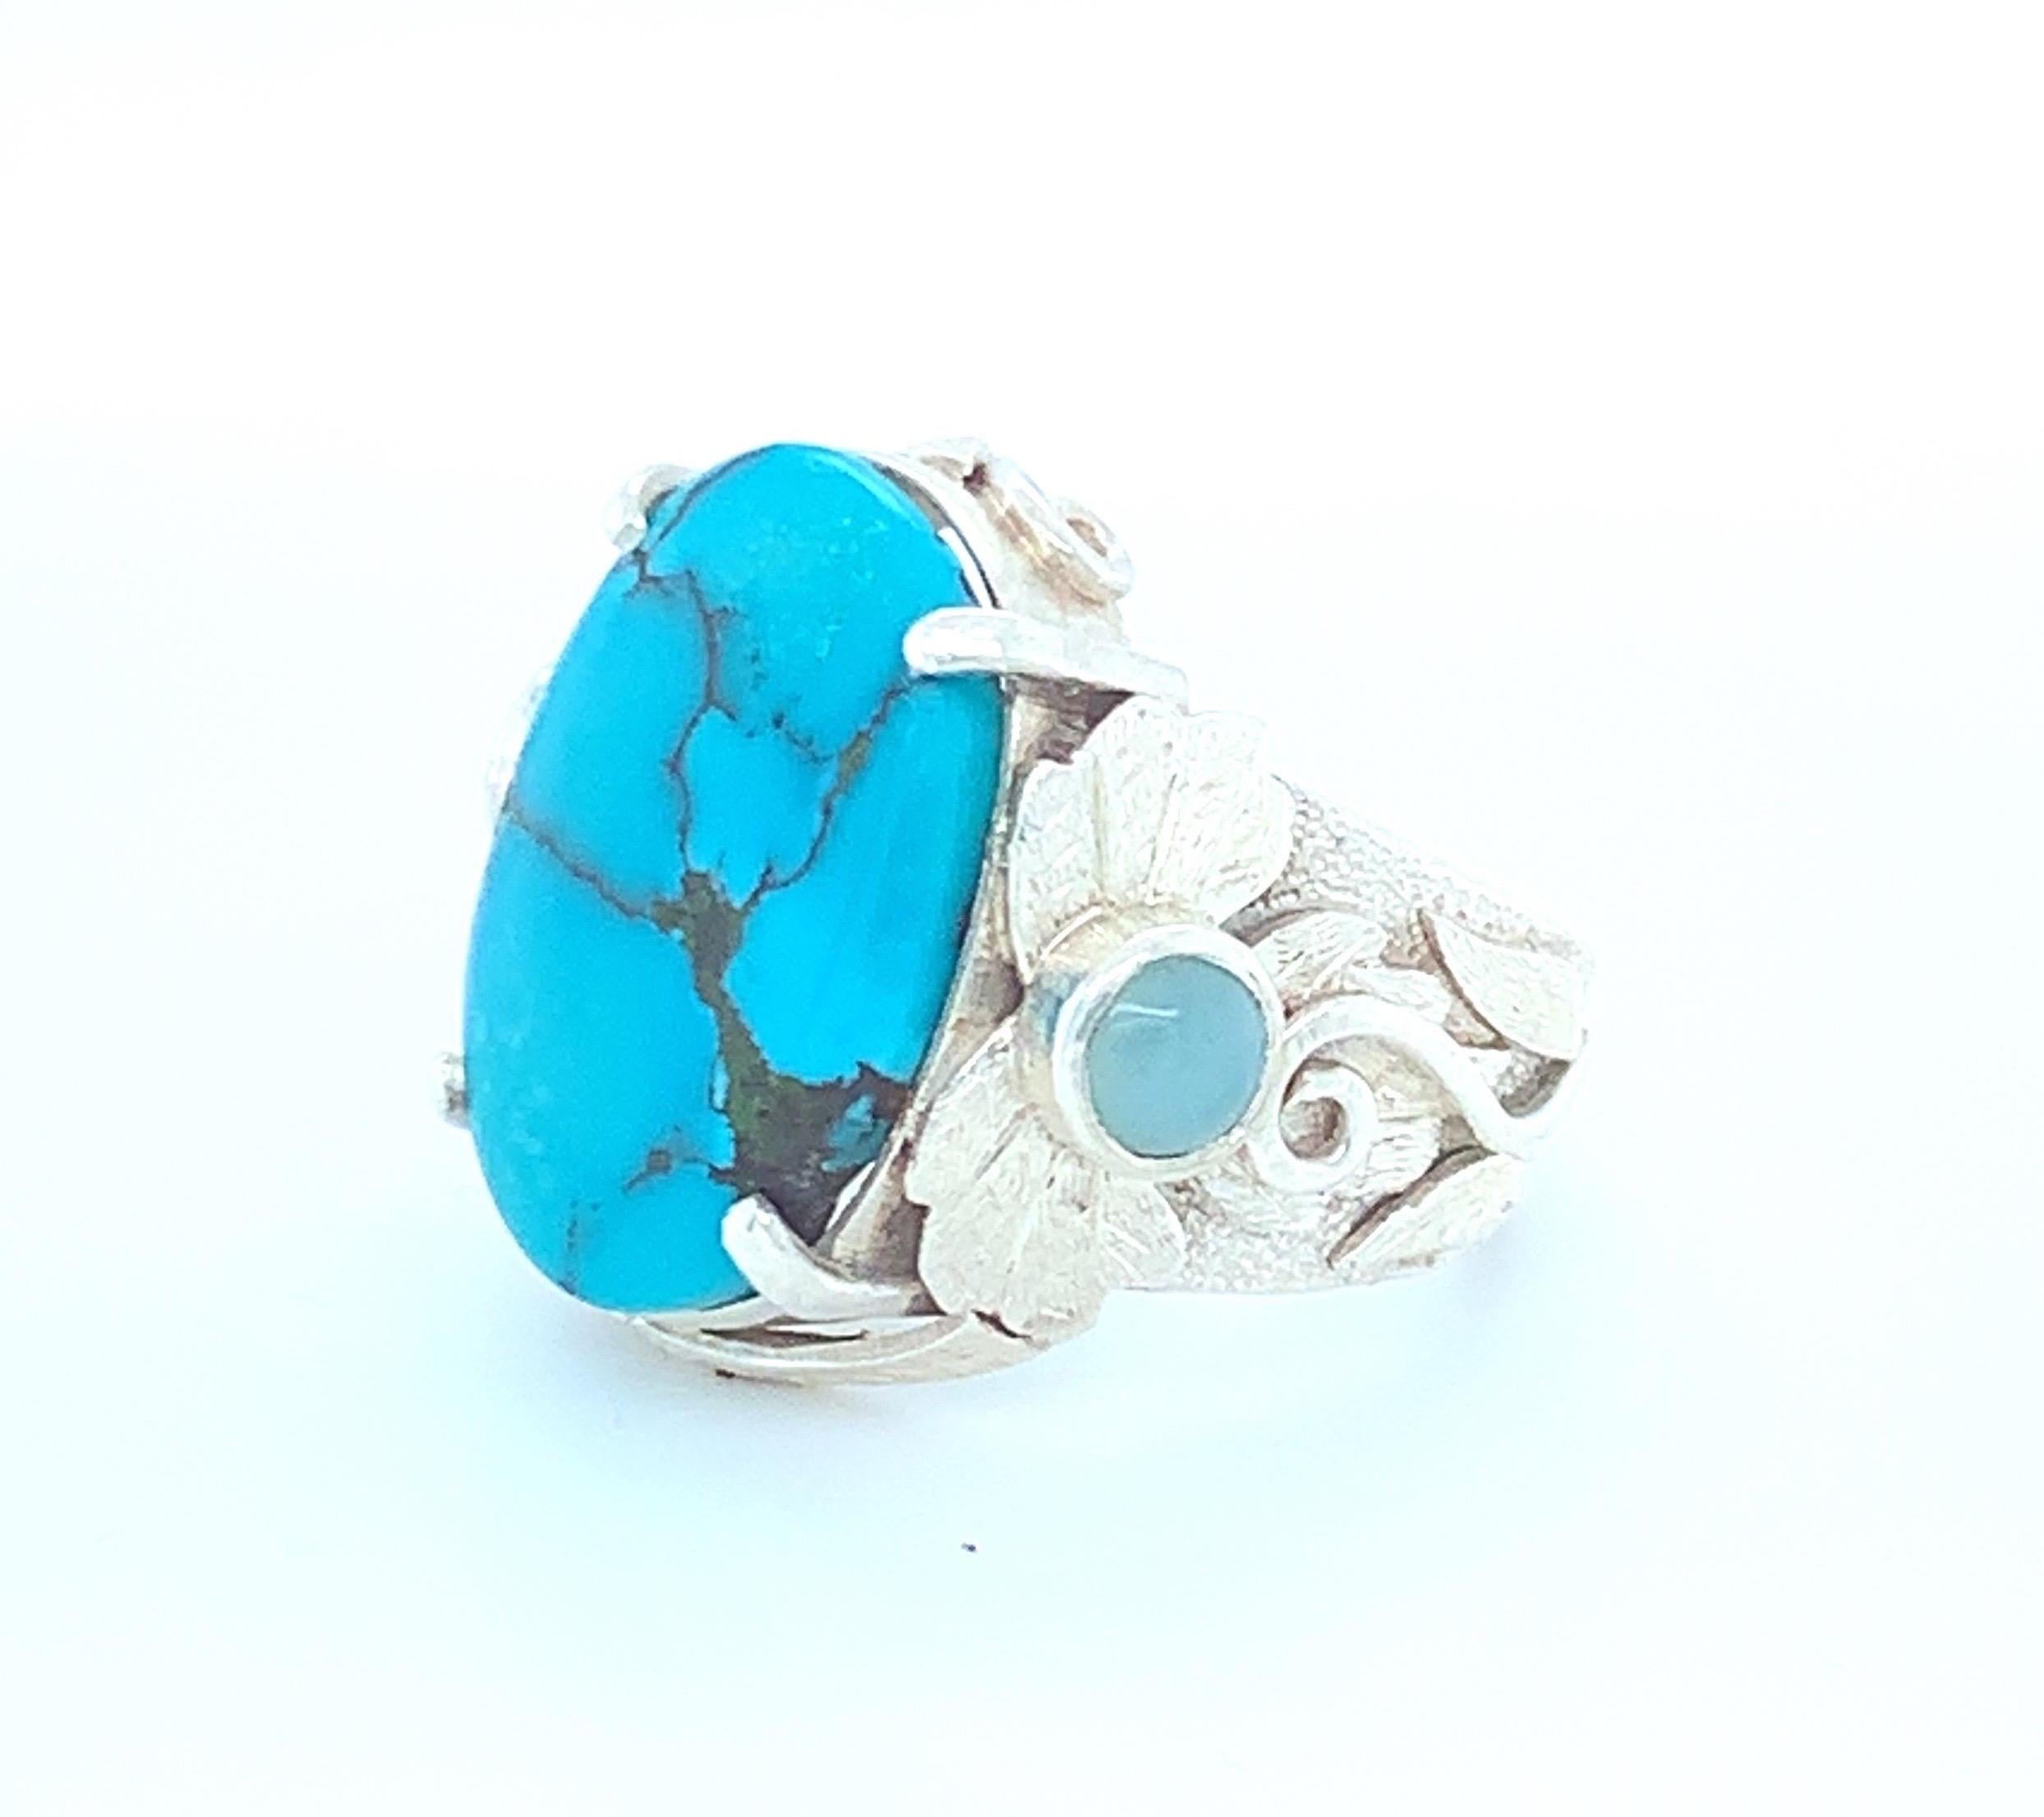 Oval turquoise is set in prong setting with blue tiny round onyx on each side of this cocktail ring. Multi-layered work is done on this one of a kind ring. This ring is carefully made with hand in sterling silver.
Natural turquoise (not powered